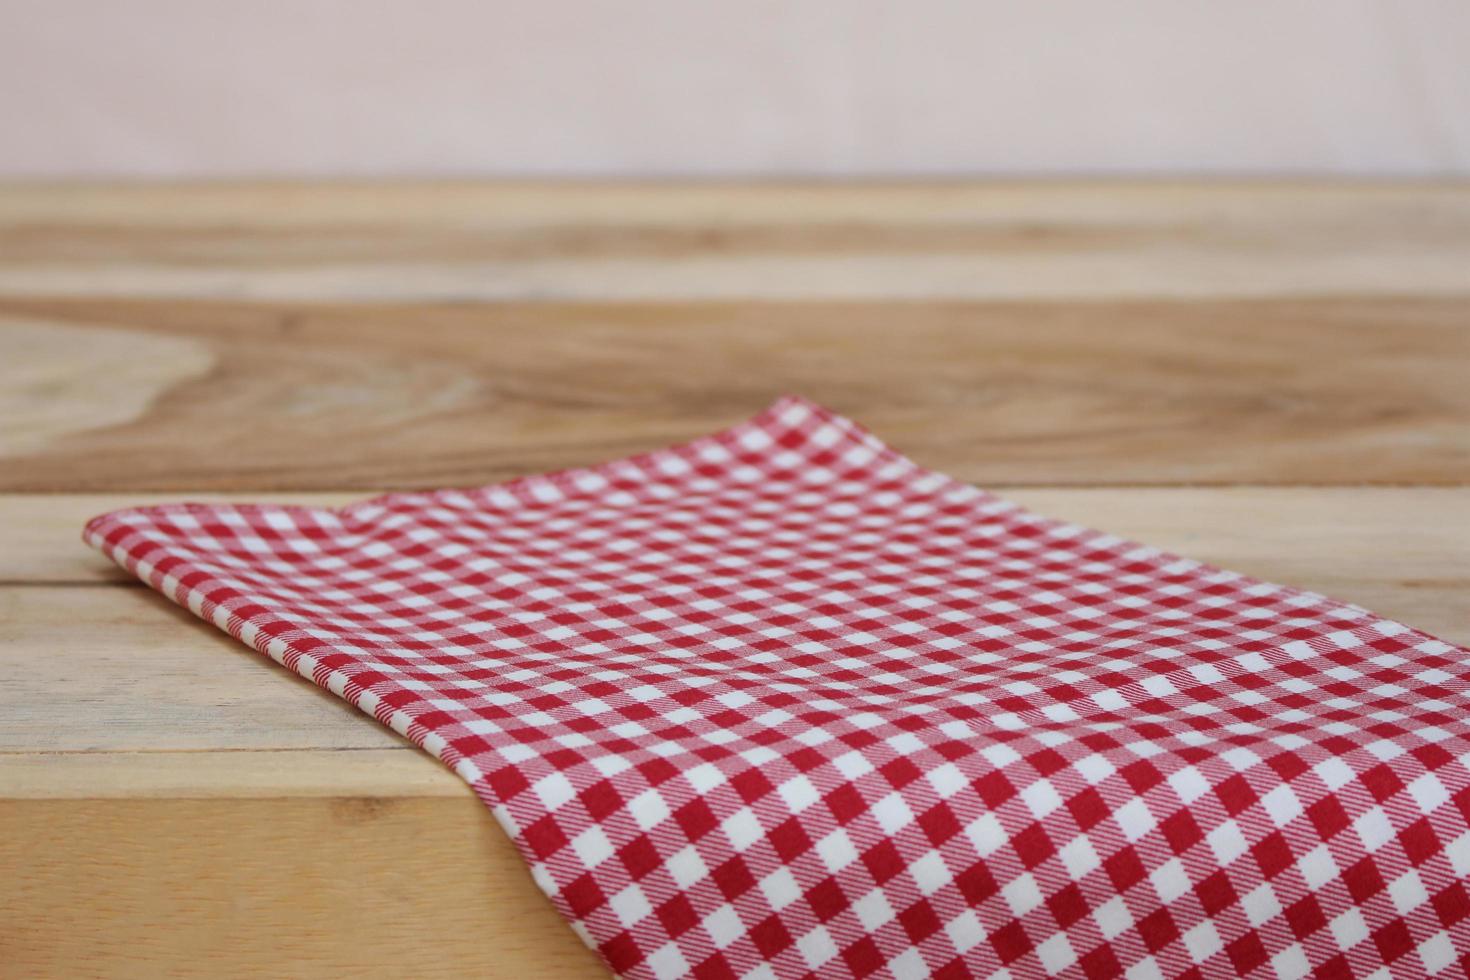 Tablecloth on table photo